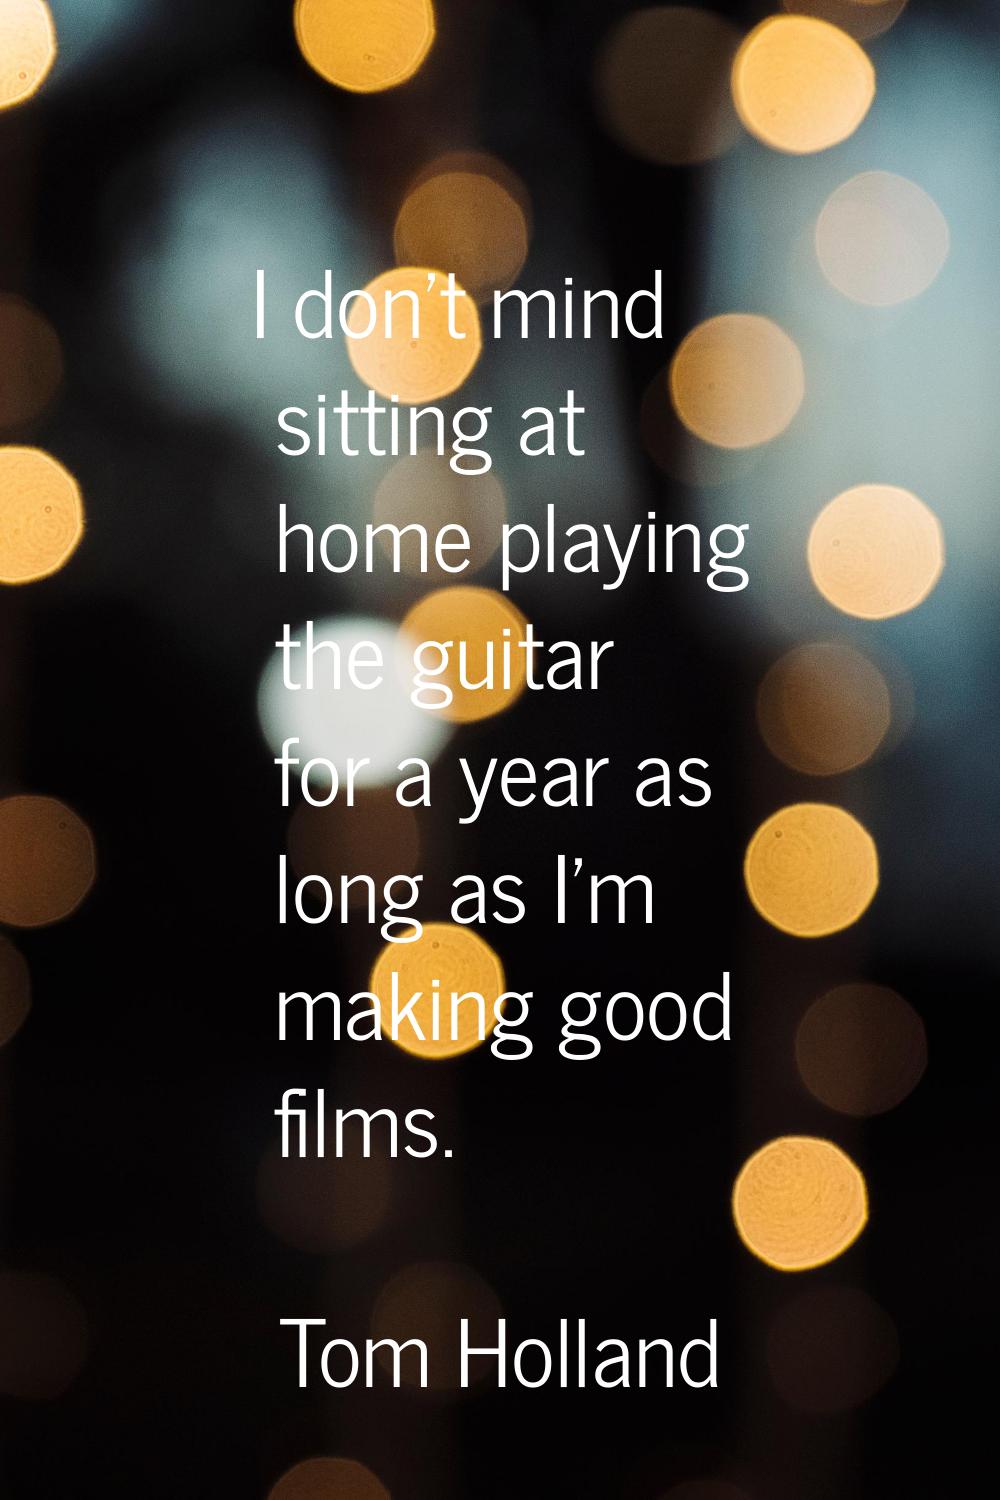 I don't mind sitting at home playing the guitar for a year as long as I'm making good films.